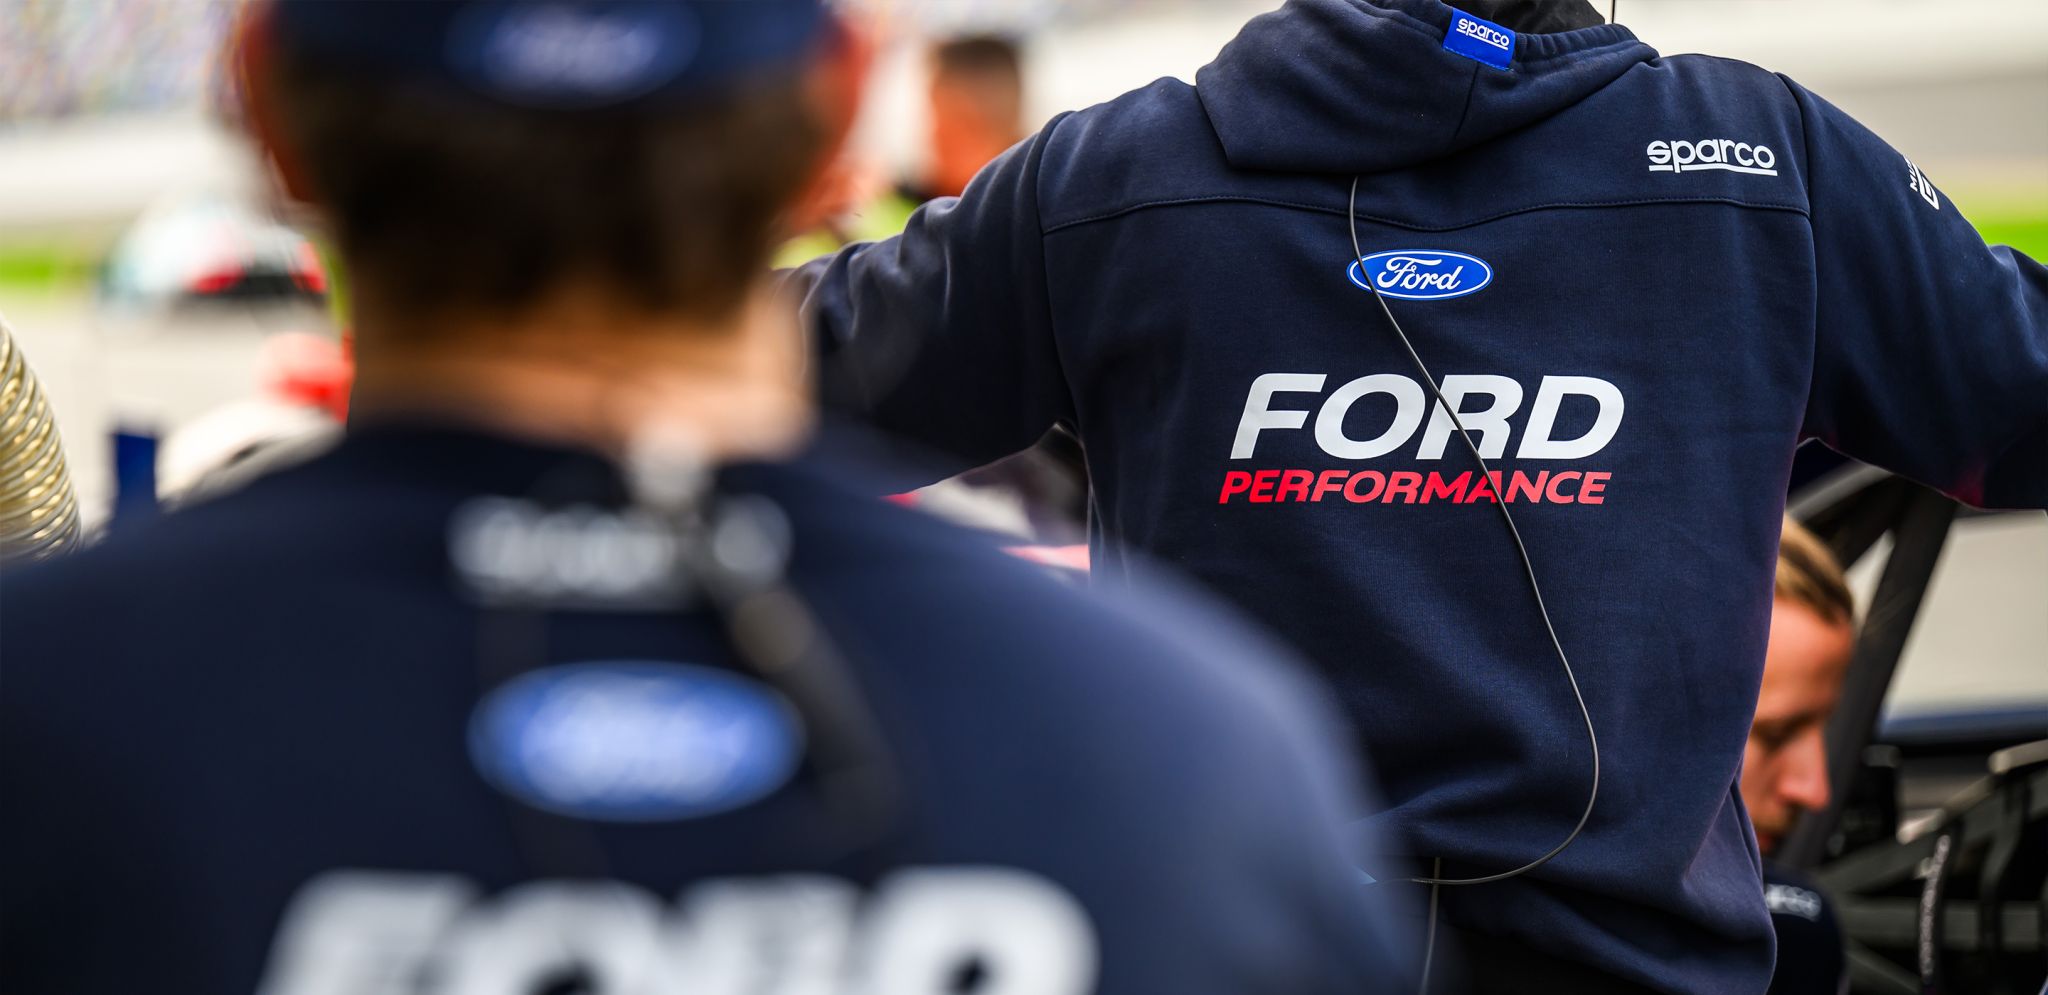 SPARCO AND FORD PERFORMANCE JOIN FORCES, STARTING WITH OFFICIAL MUSTANG GT3 RACING PROGRAM